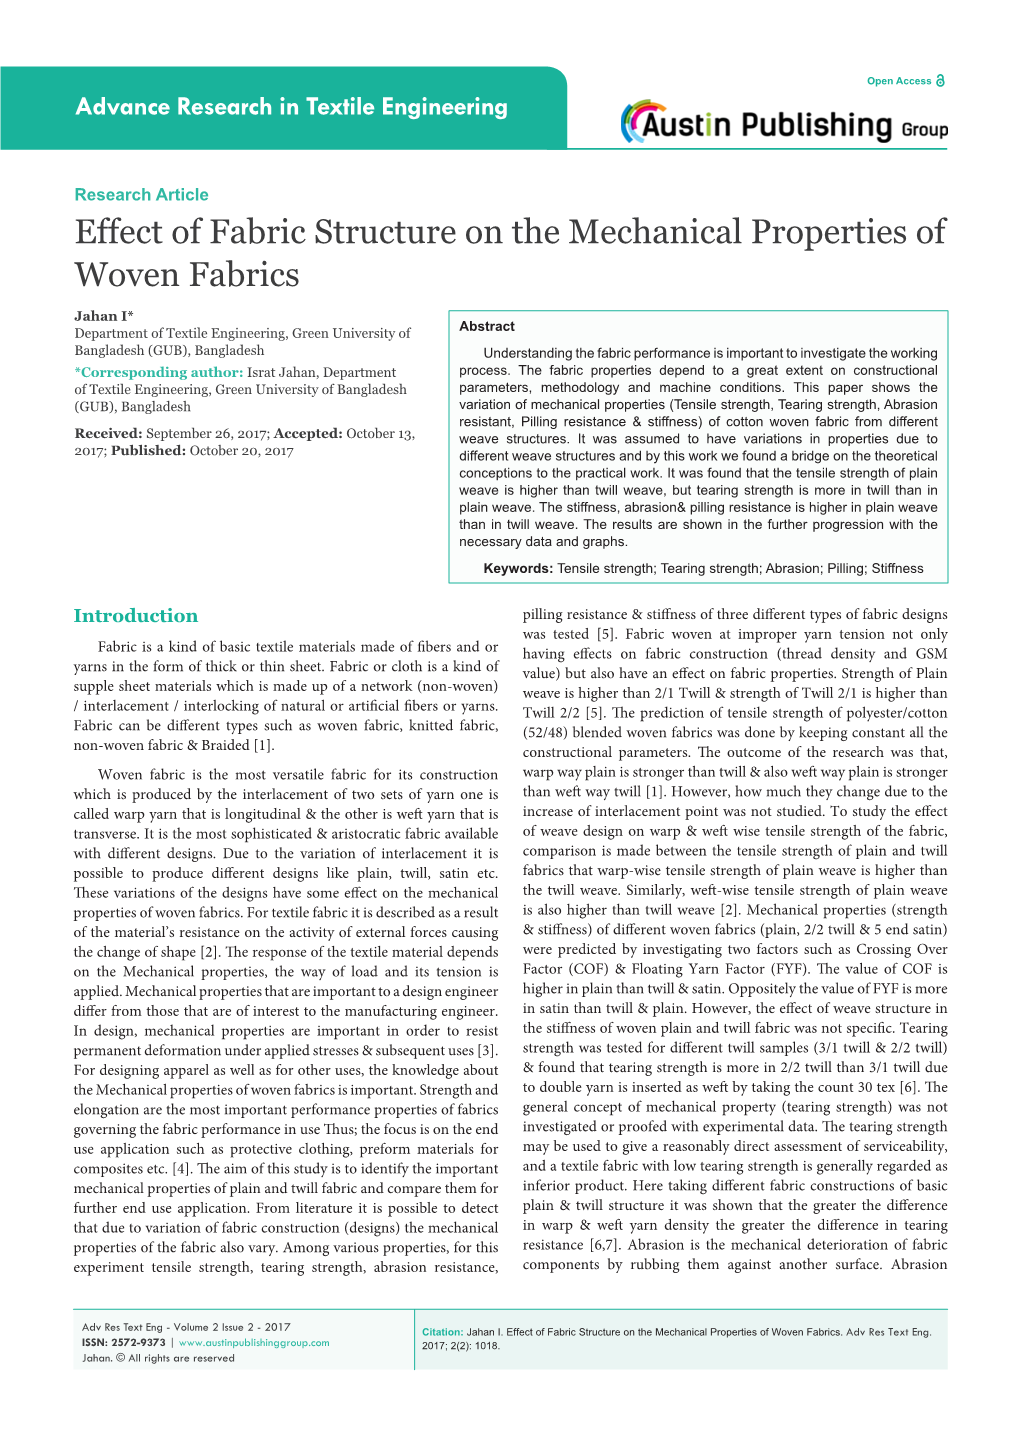 Effect of Fabric Structure on the Mechanical Properties of Woven Fabrics